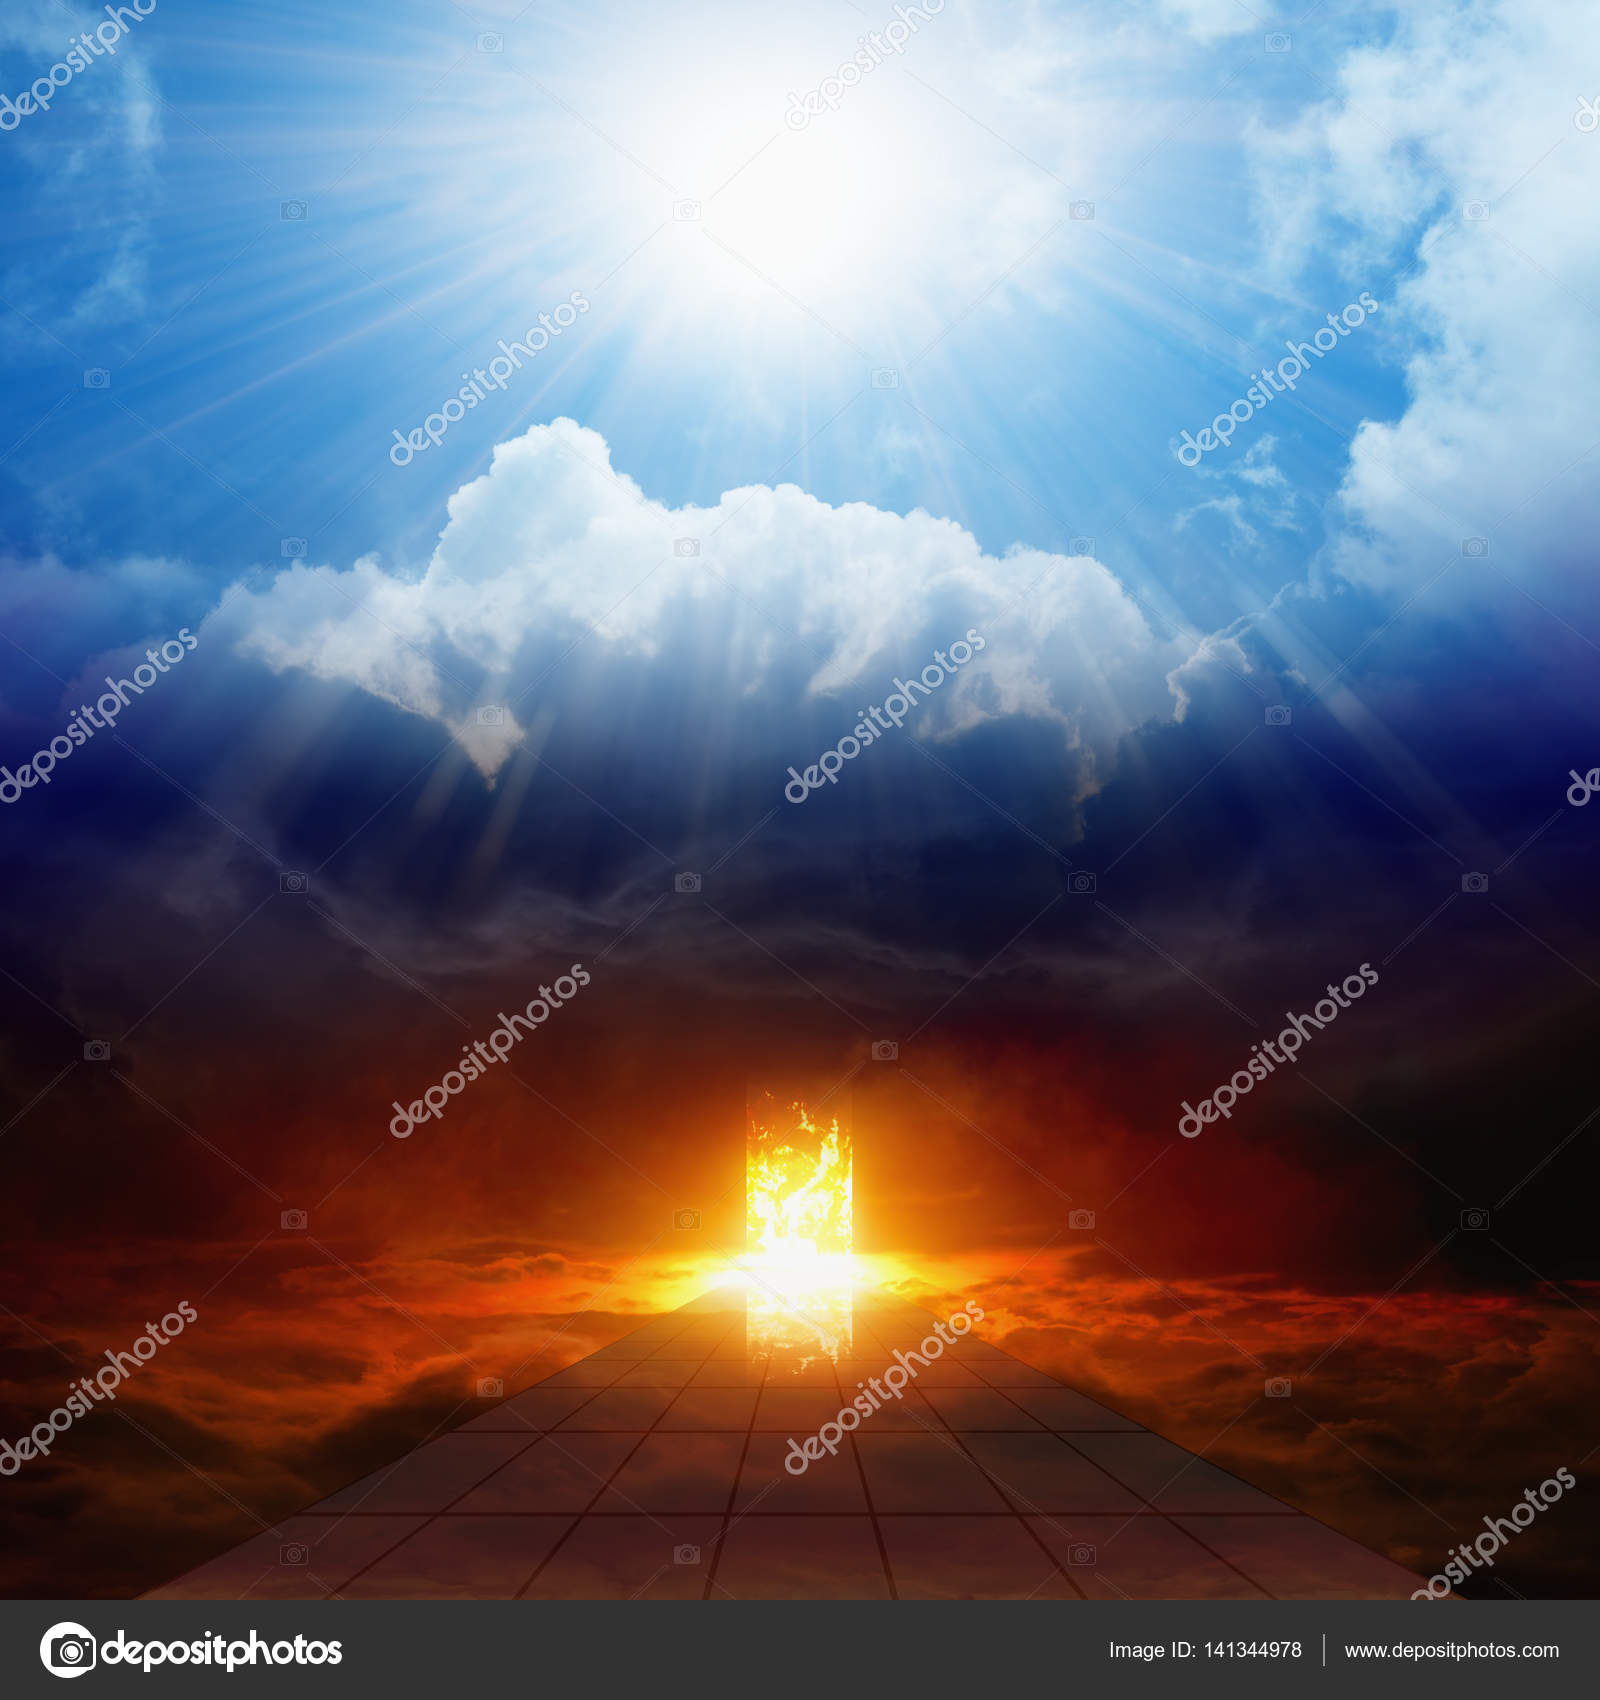 Bright Light From Heaven Road To Hell Heaven And Hell Stock Photo C I G0rzh